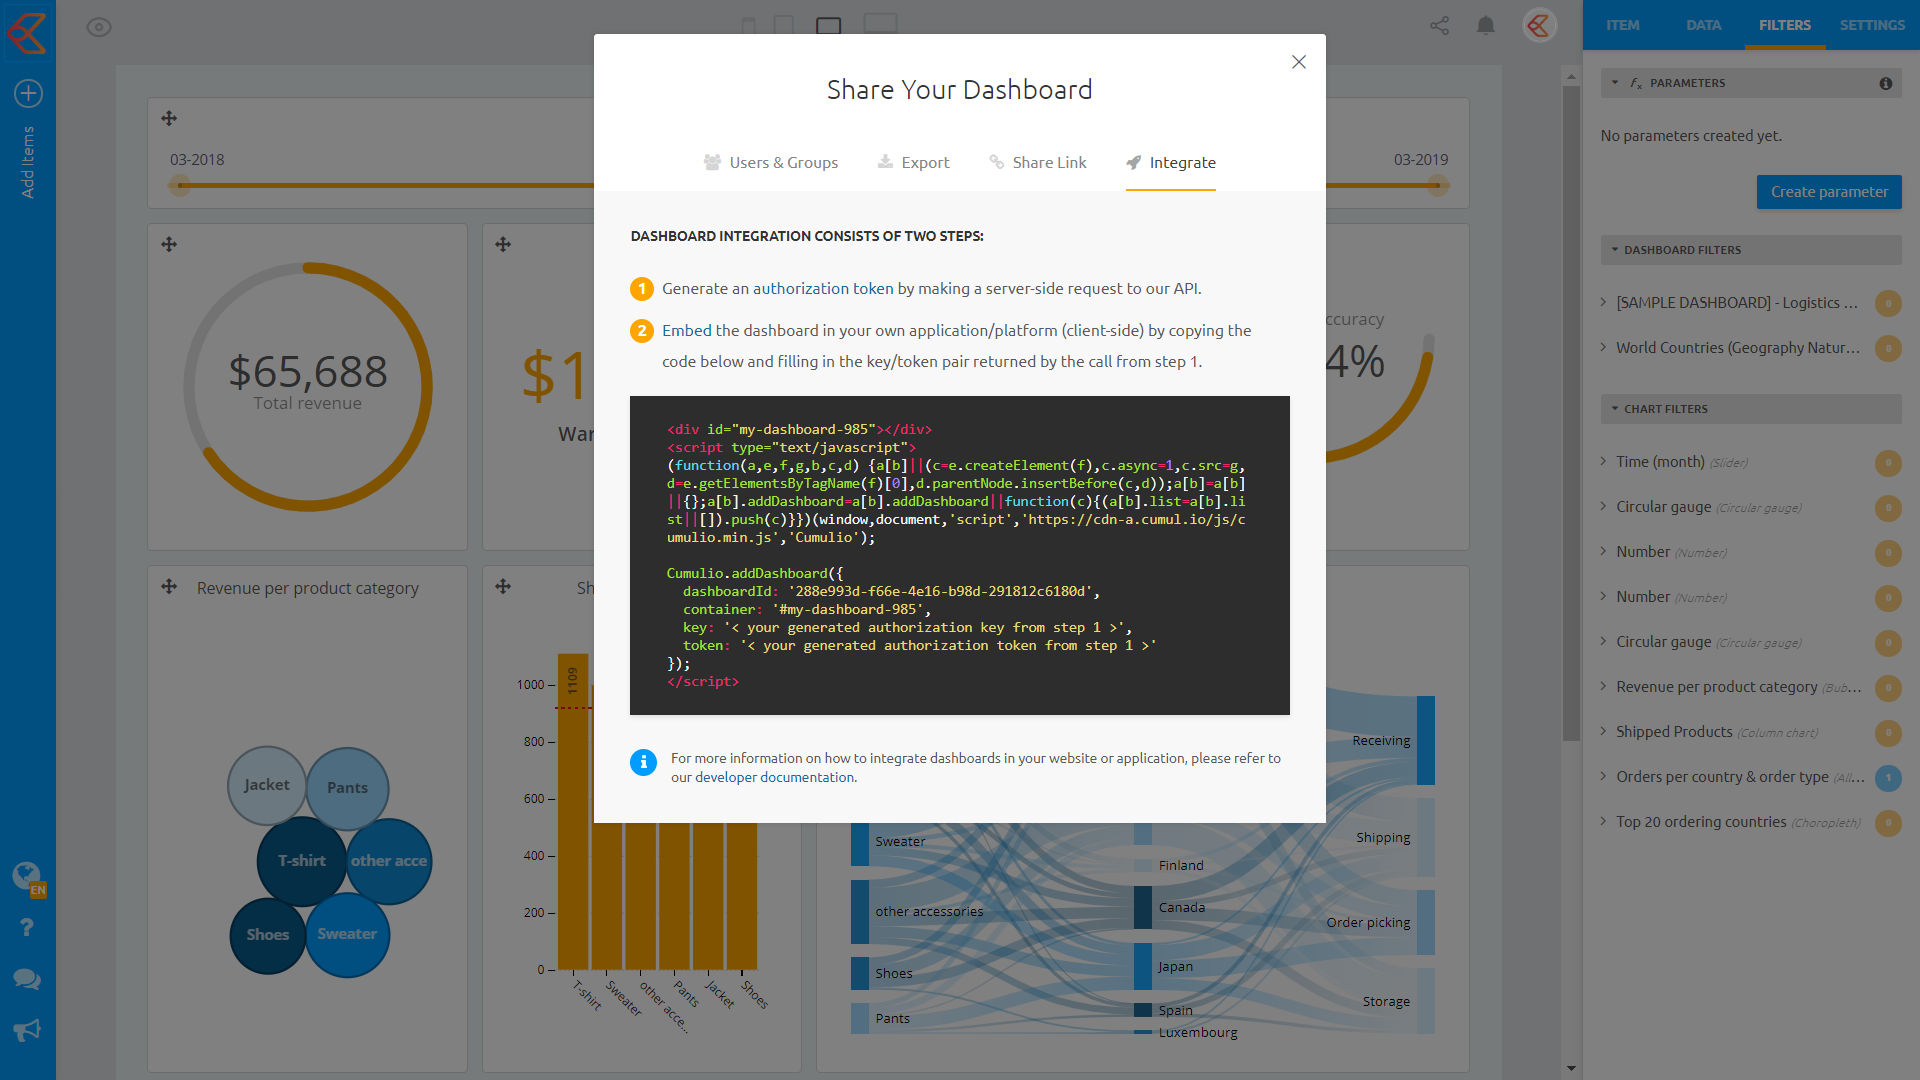 Cumul.io - Embed dashboards in your own application by copy-pasting this short snippet of code.